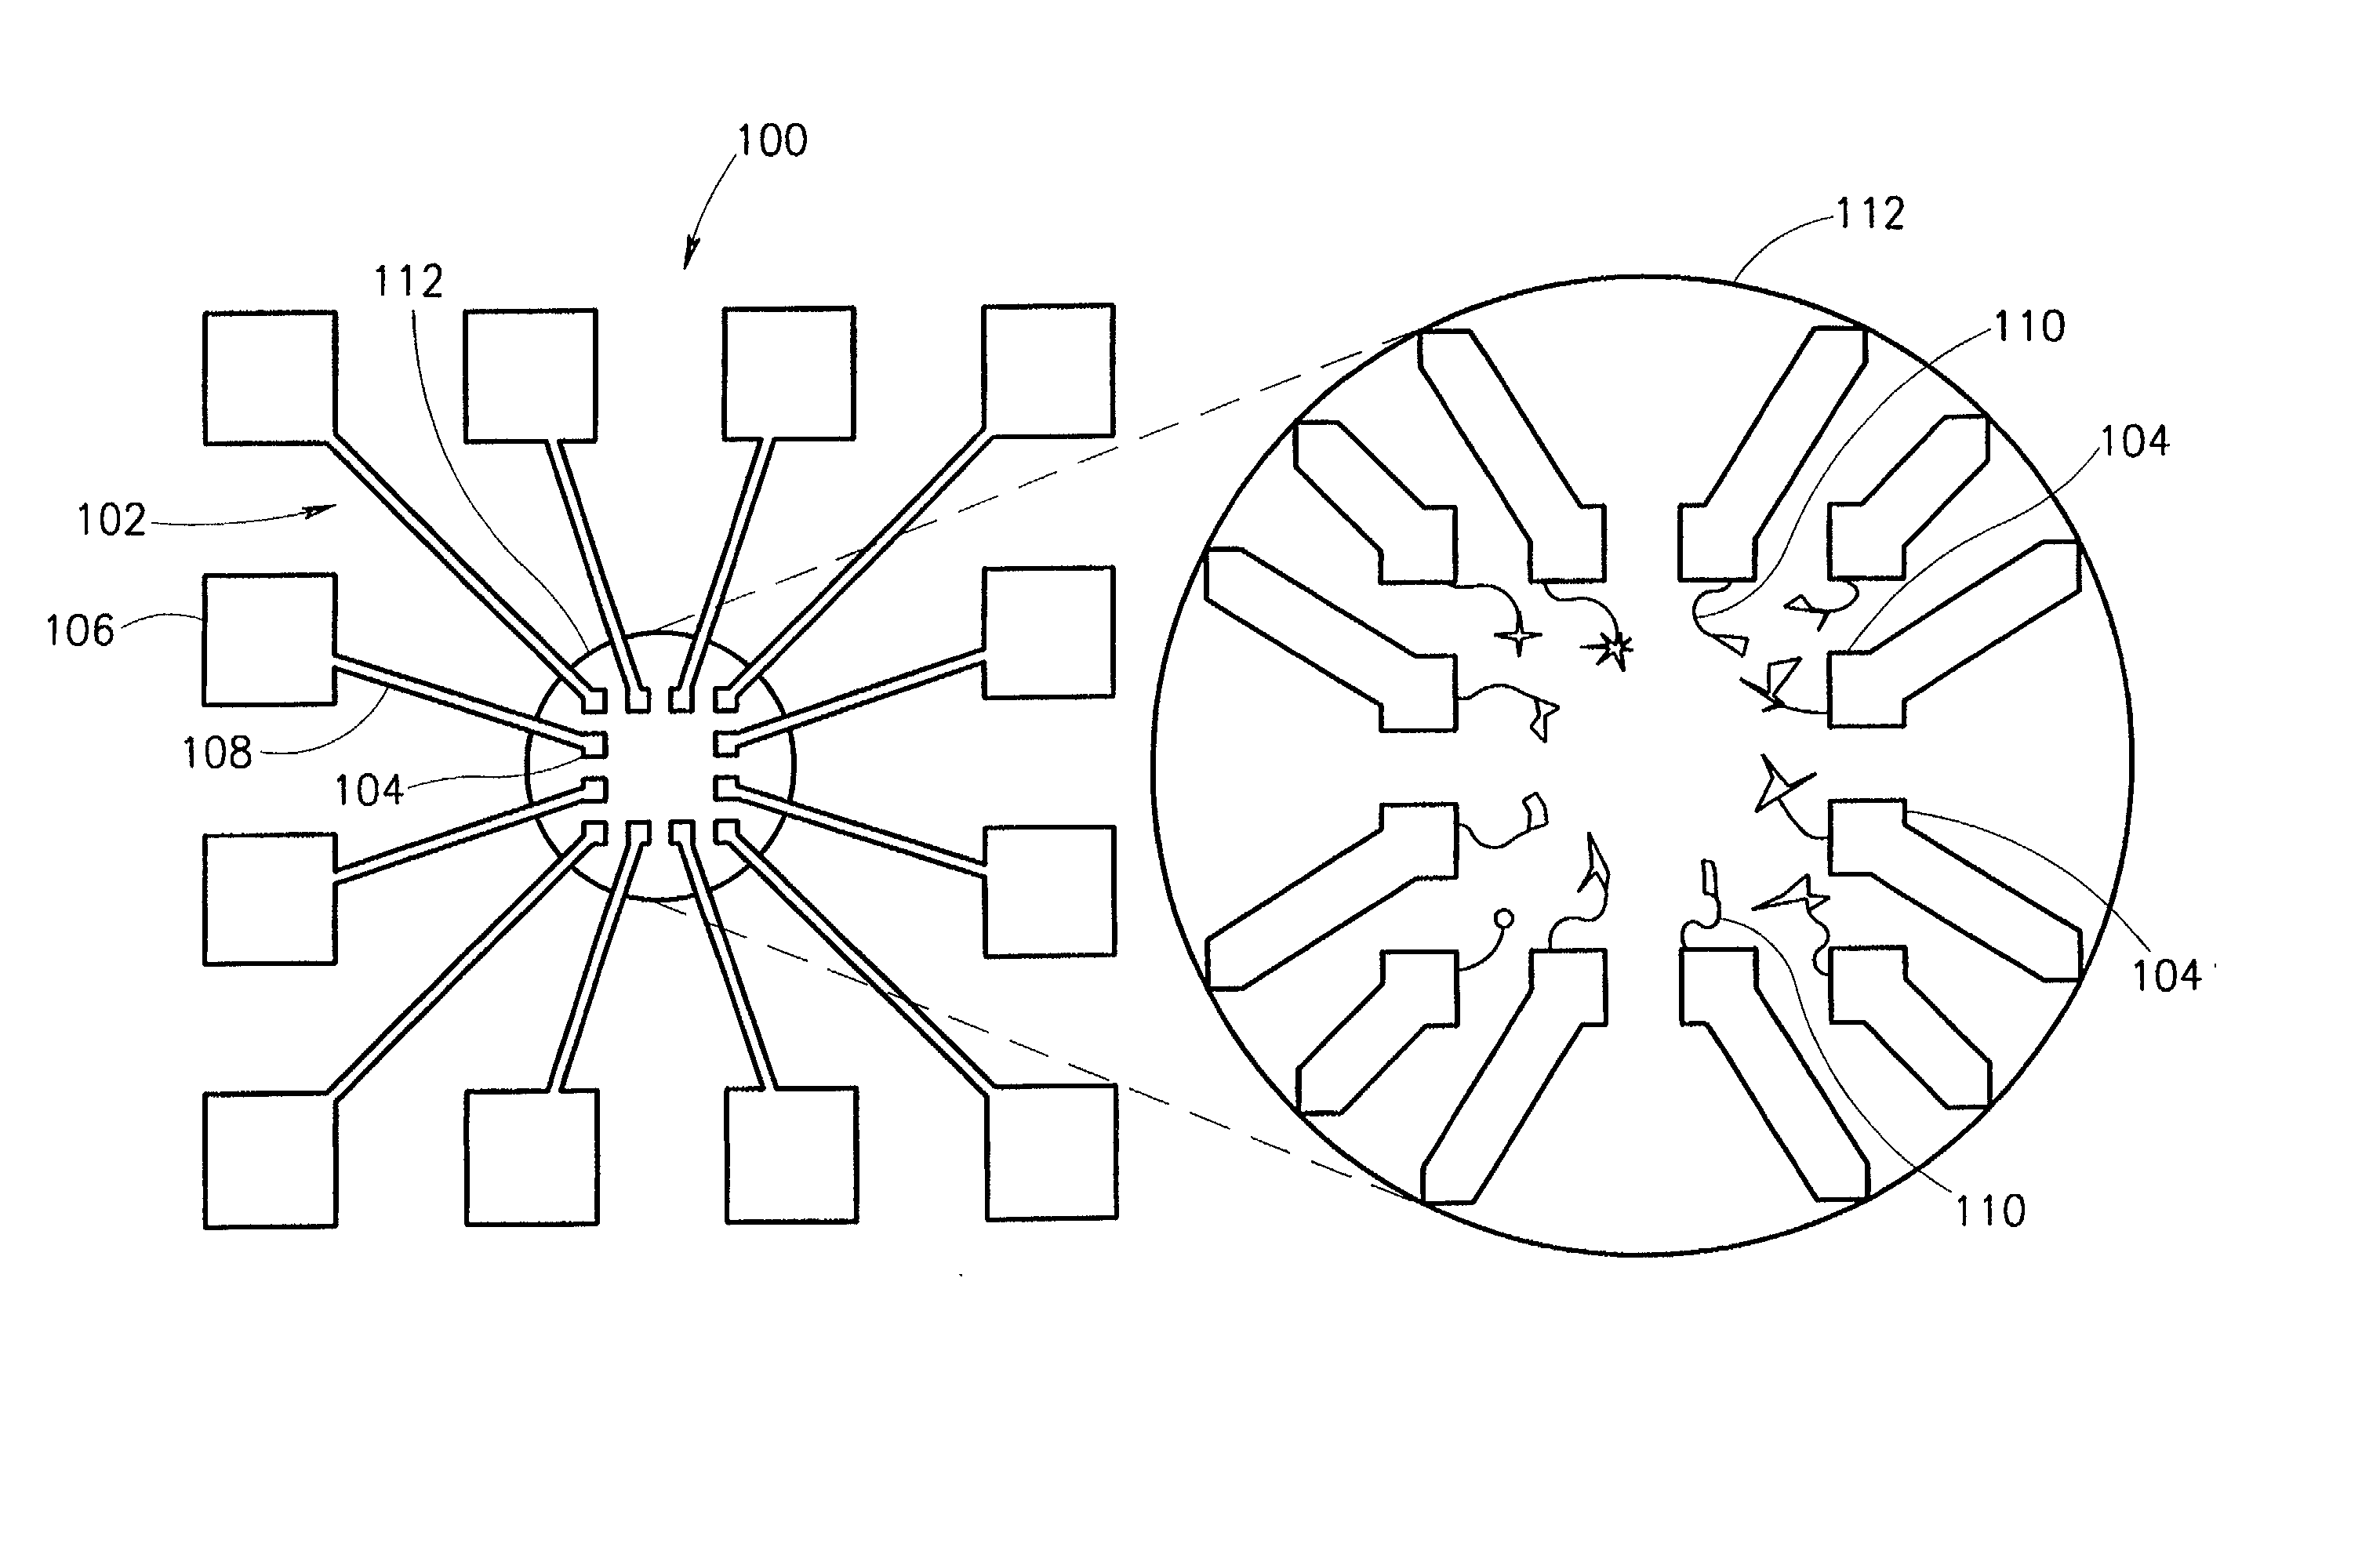 Microelectronic components and electronic networks comprising DNA